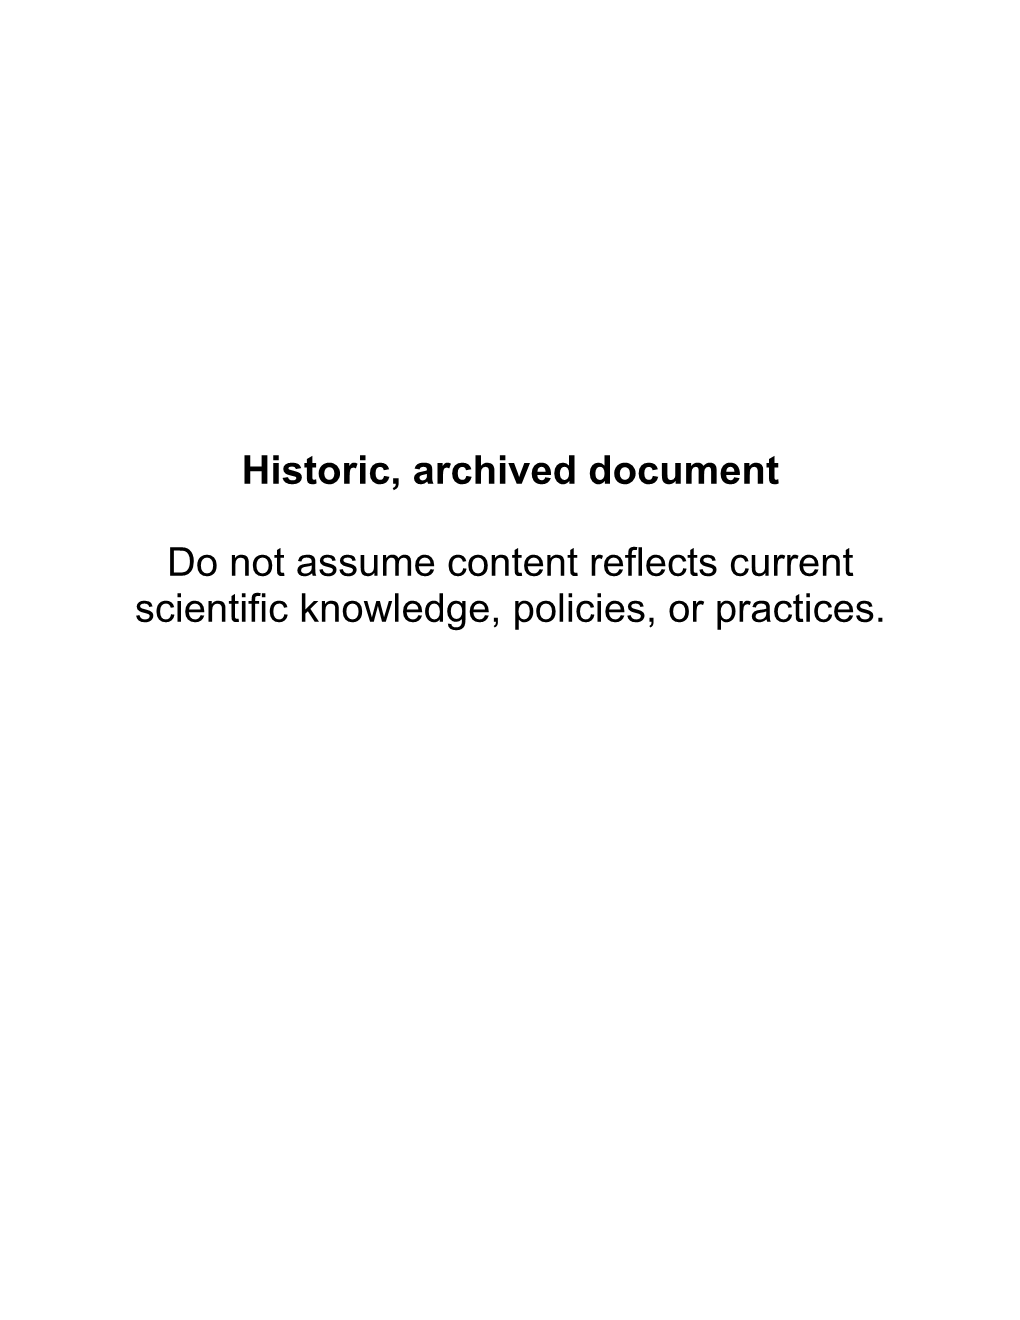 Historic, Archived Document Do Not Assume Content Reflects Current Scientific Knowledge, Policies, Or Practices